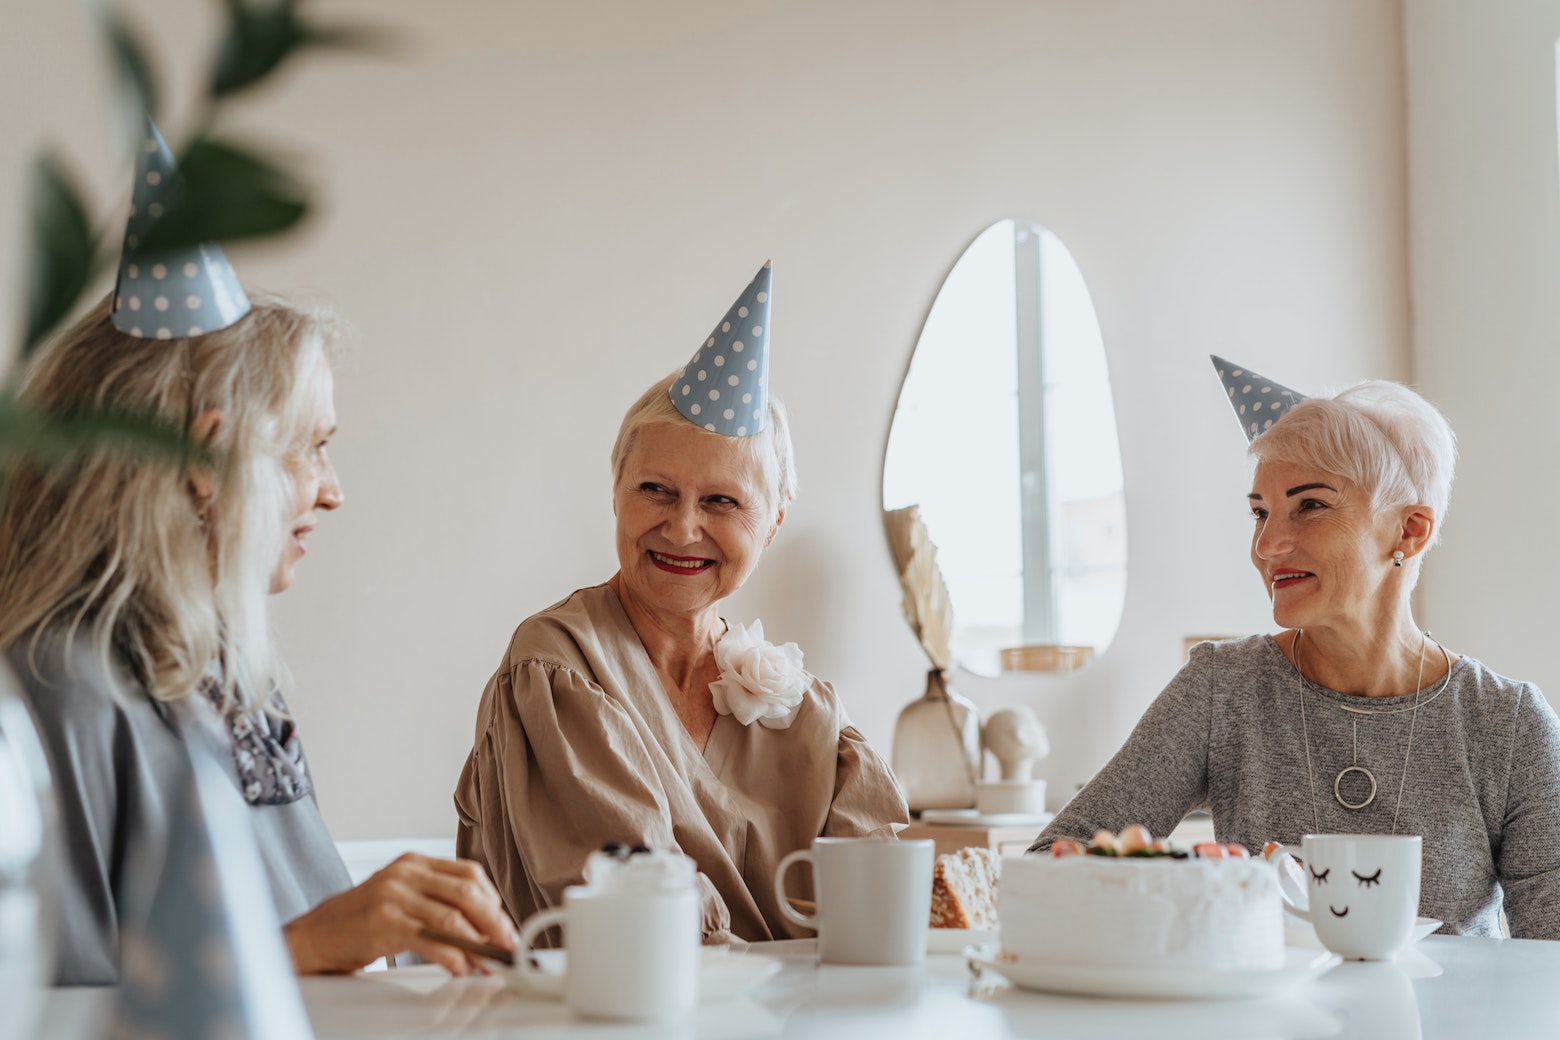 Women wearing party hats and eating birthday cake